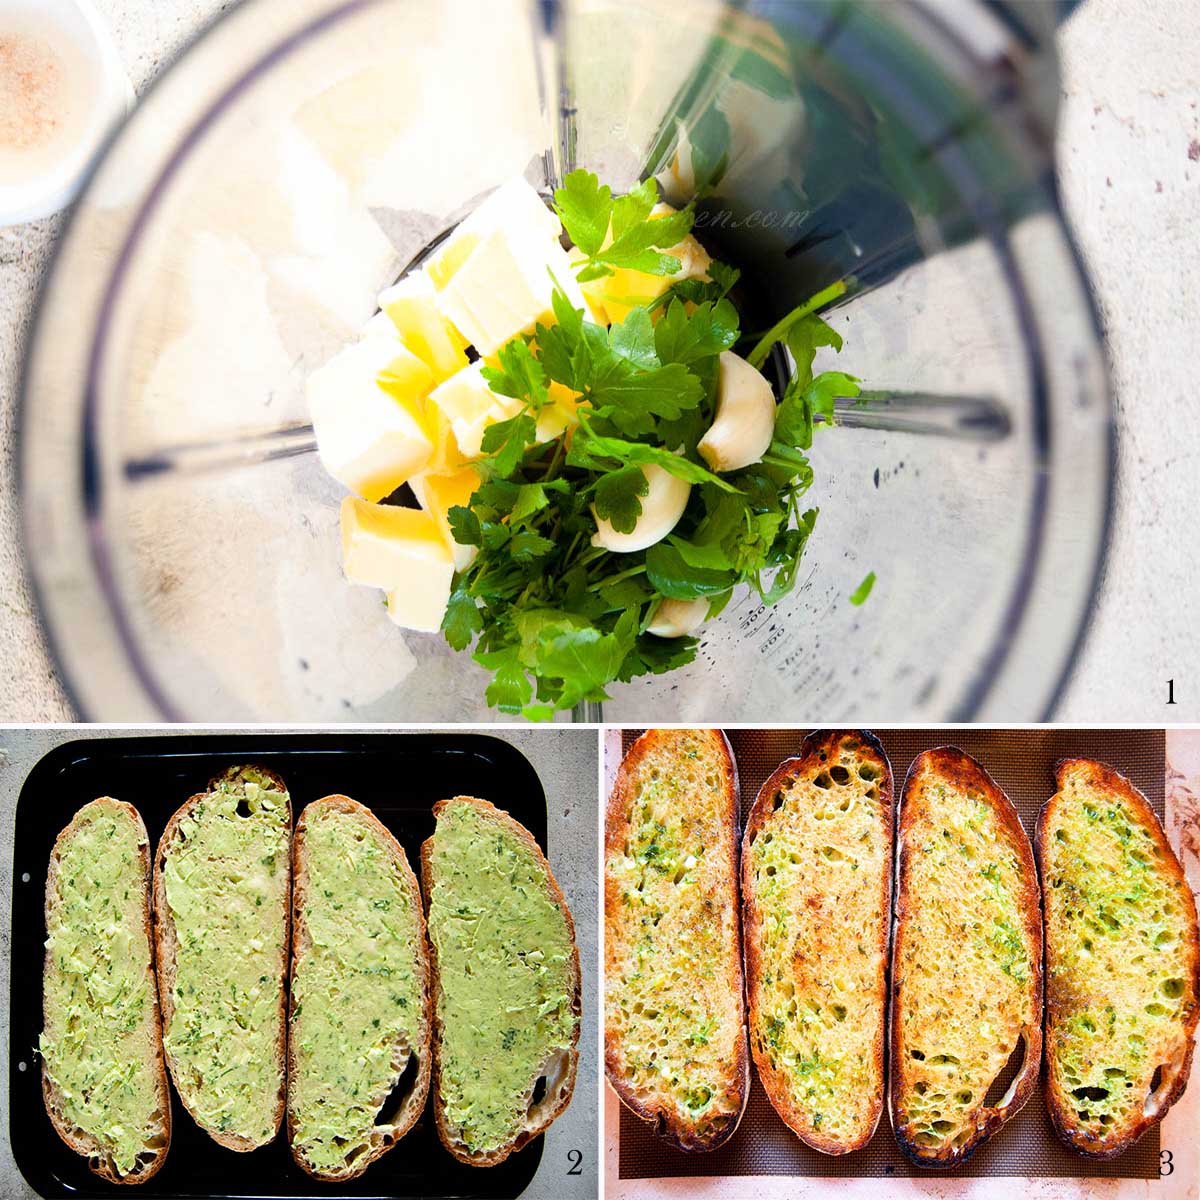 a collage of three photos: blending ingredients in a food processor, garlic butter spread on sliced bread and baked sliced bread with garlic butter.